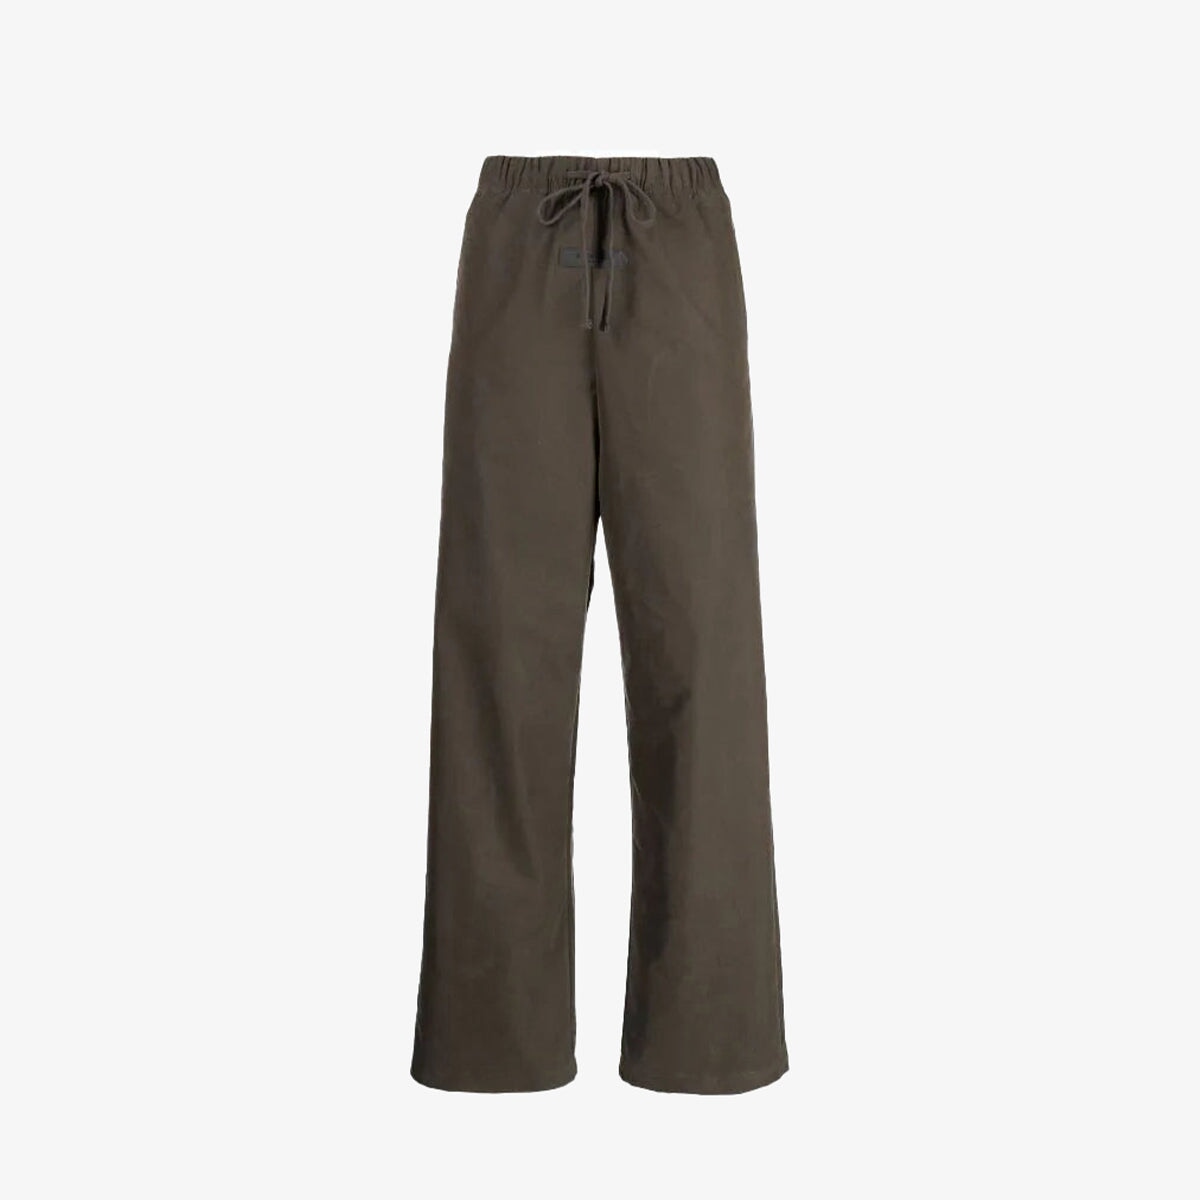 Essentials Fear of God Relaxed Trouser Drawstring Waist “Wood” Plug and Play